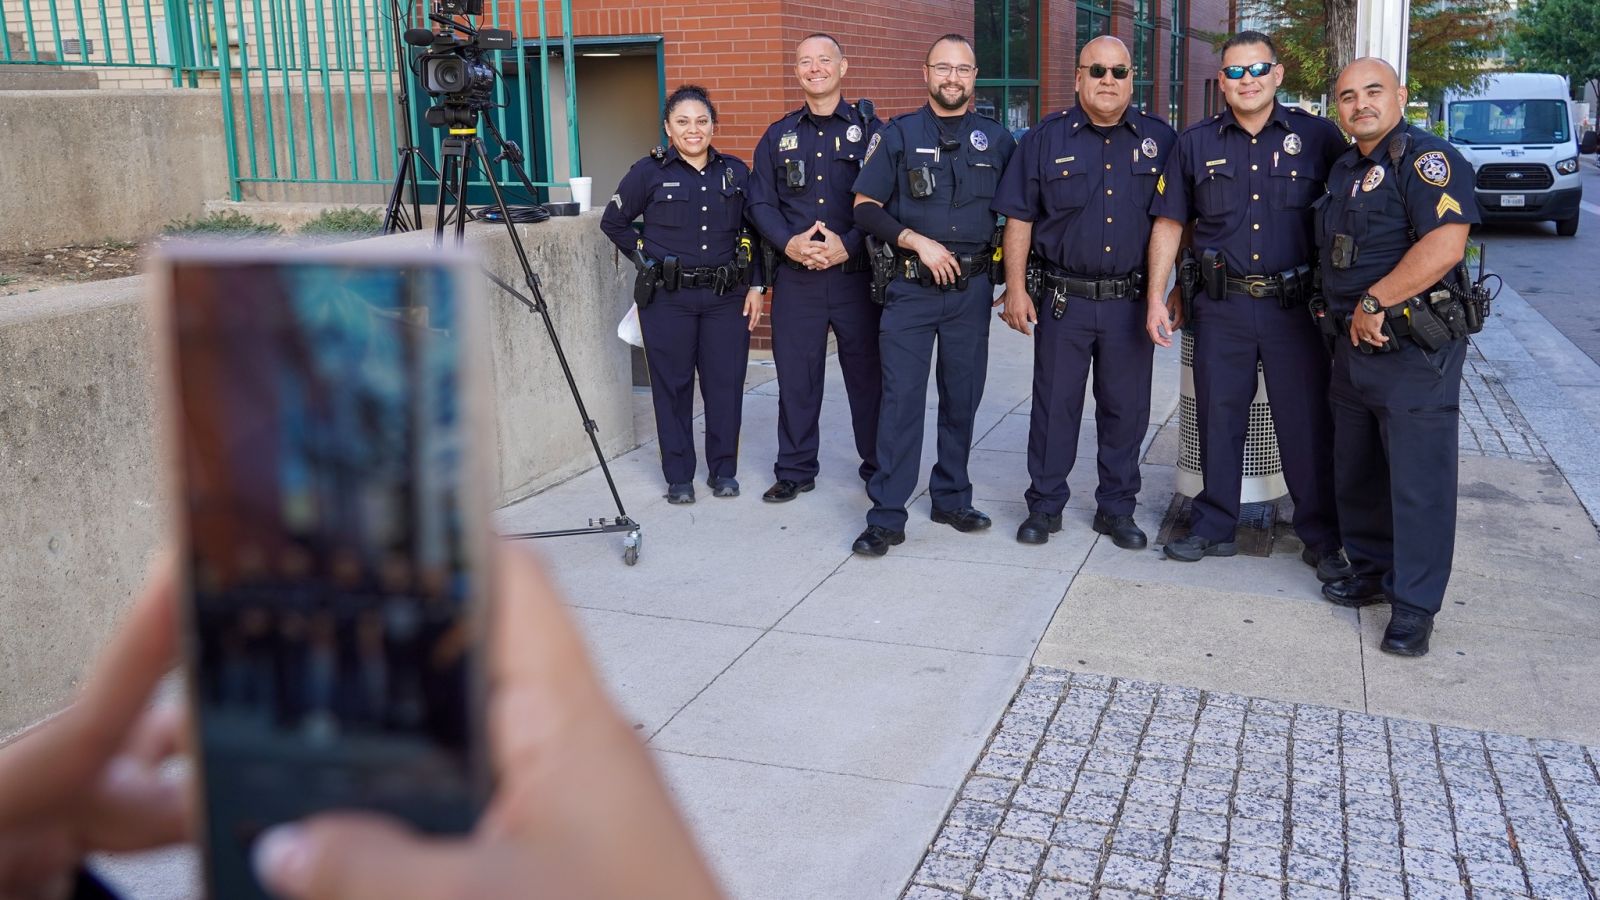 Police officers taking a photo